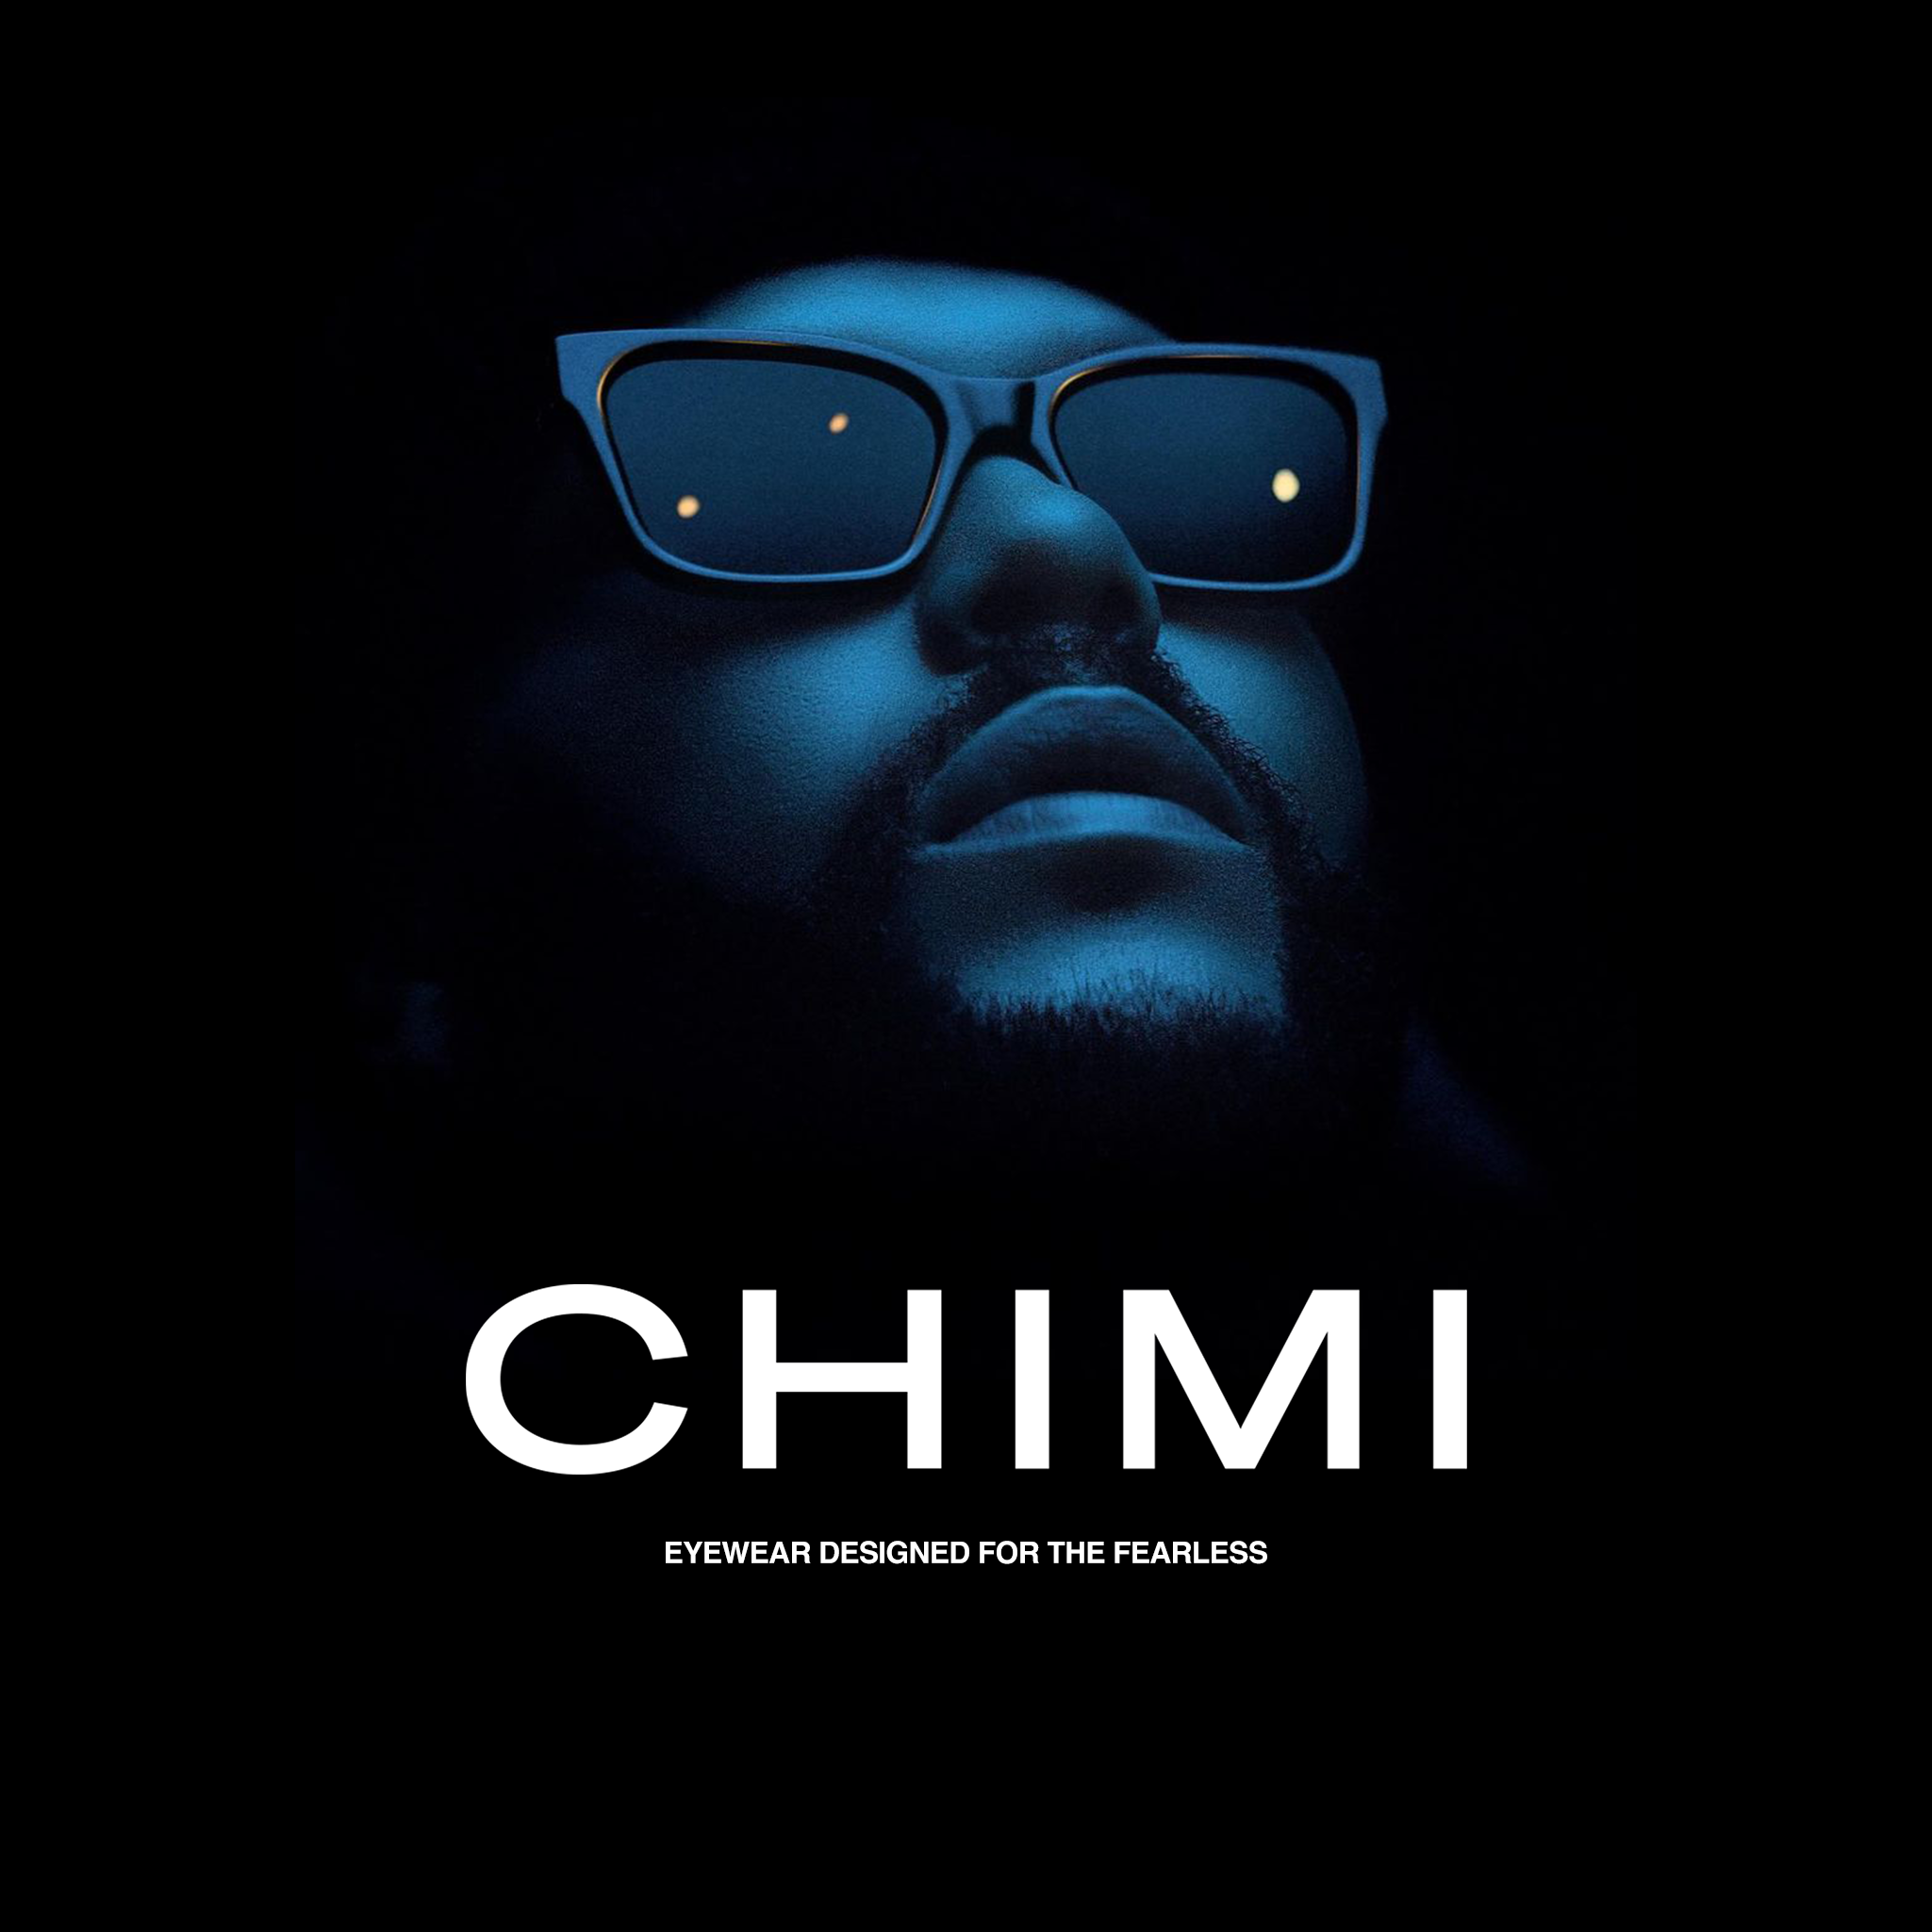 CHIMI: Eyewear Designed for the Fearless